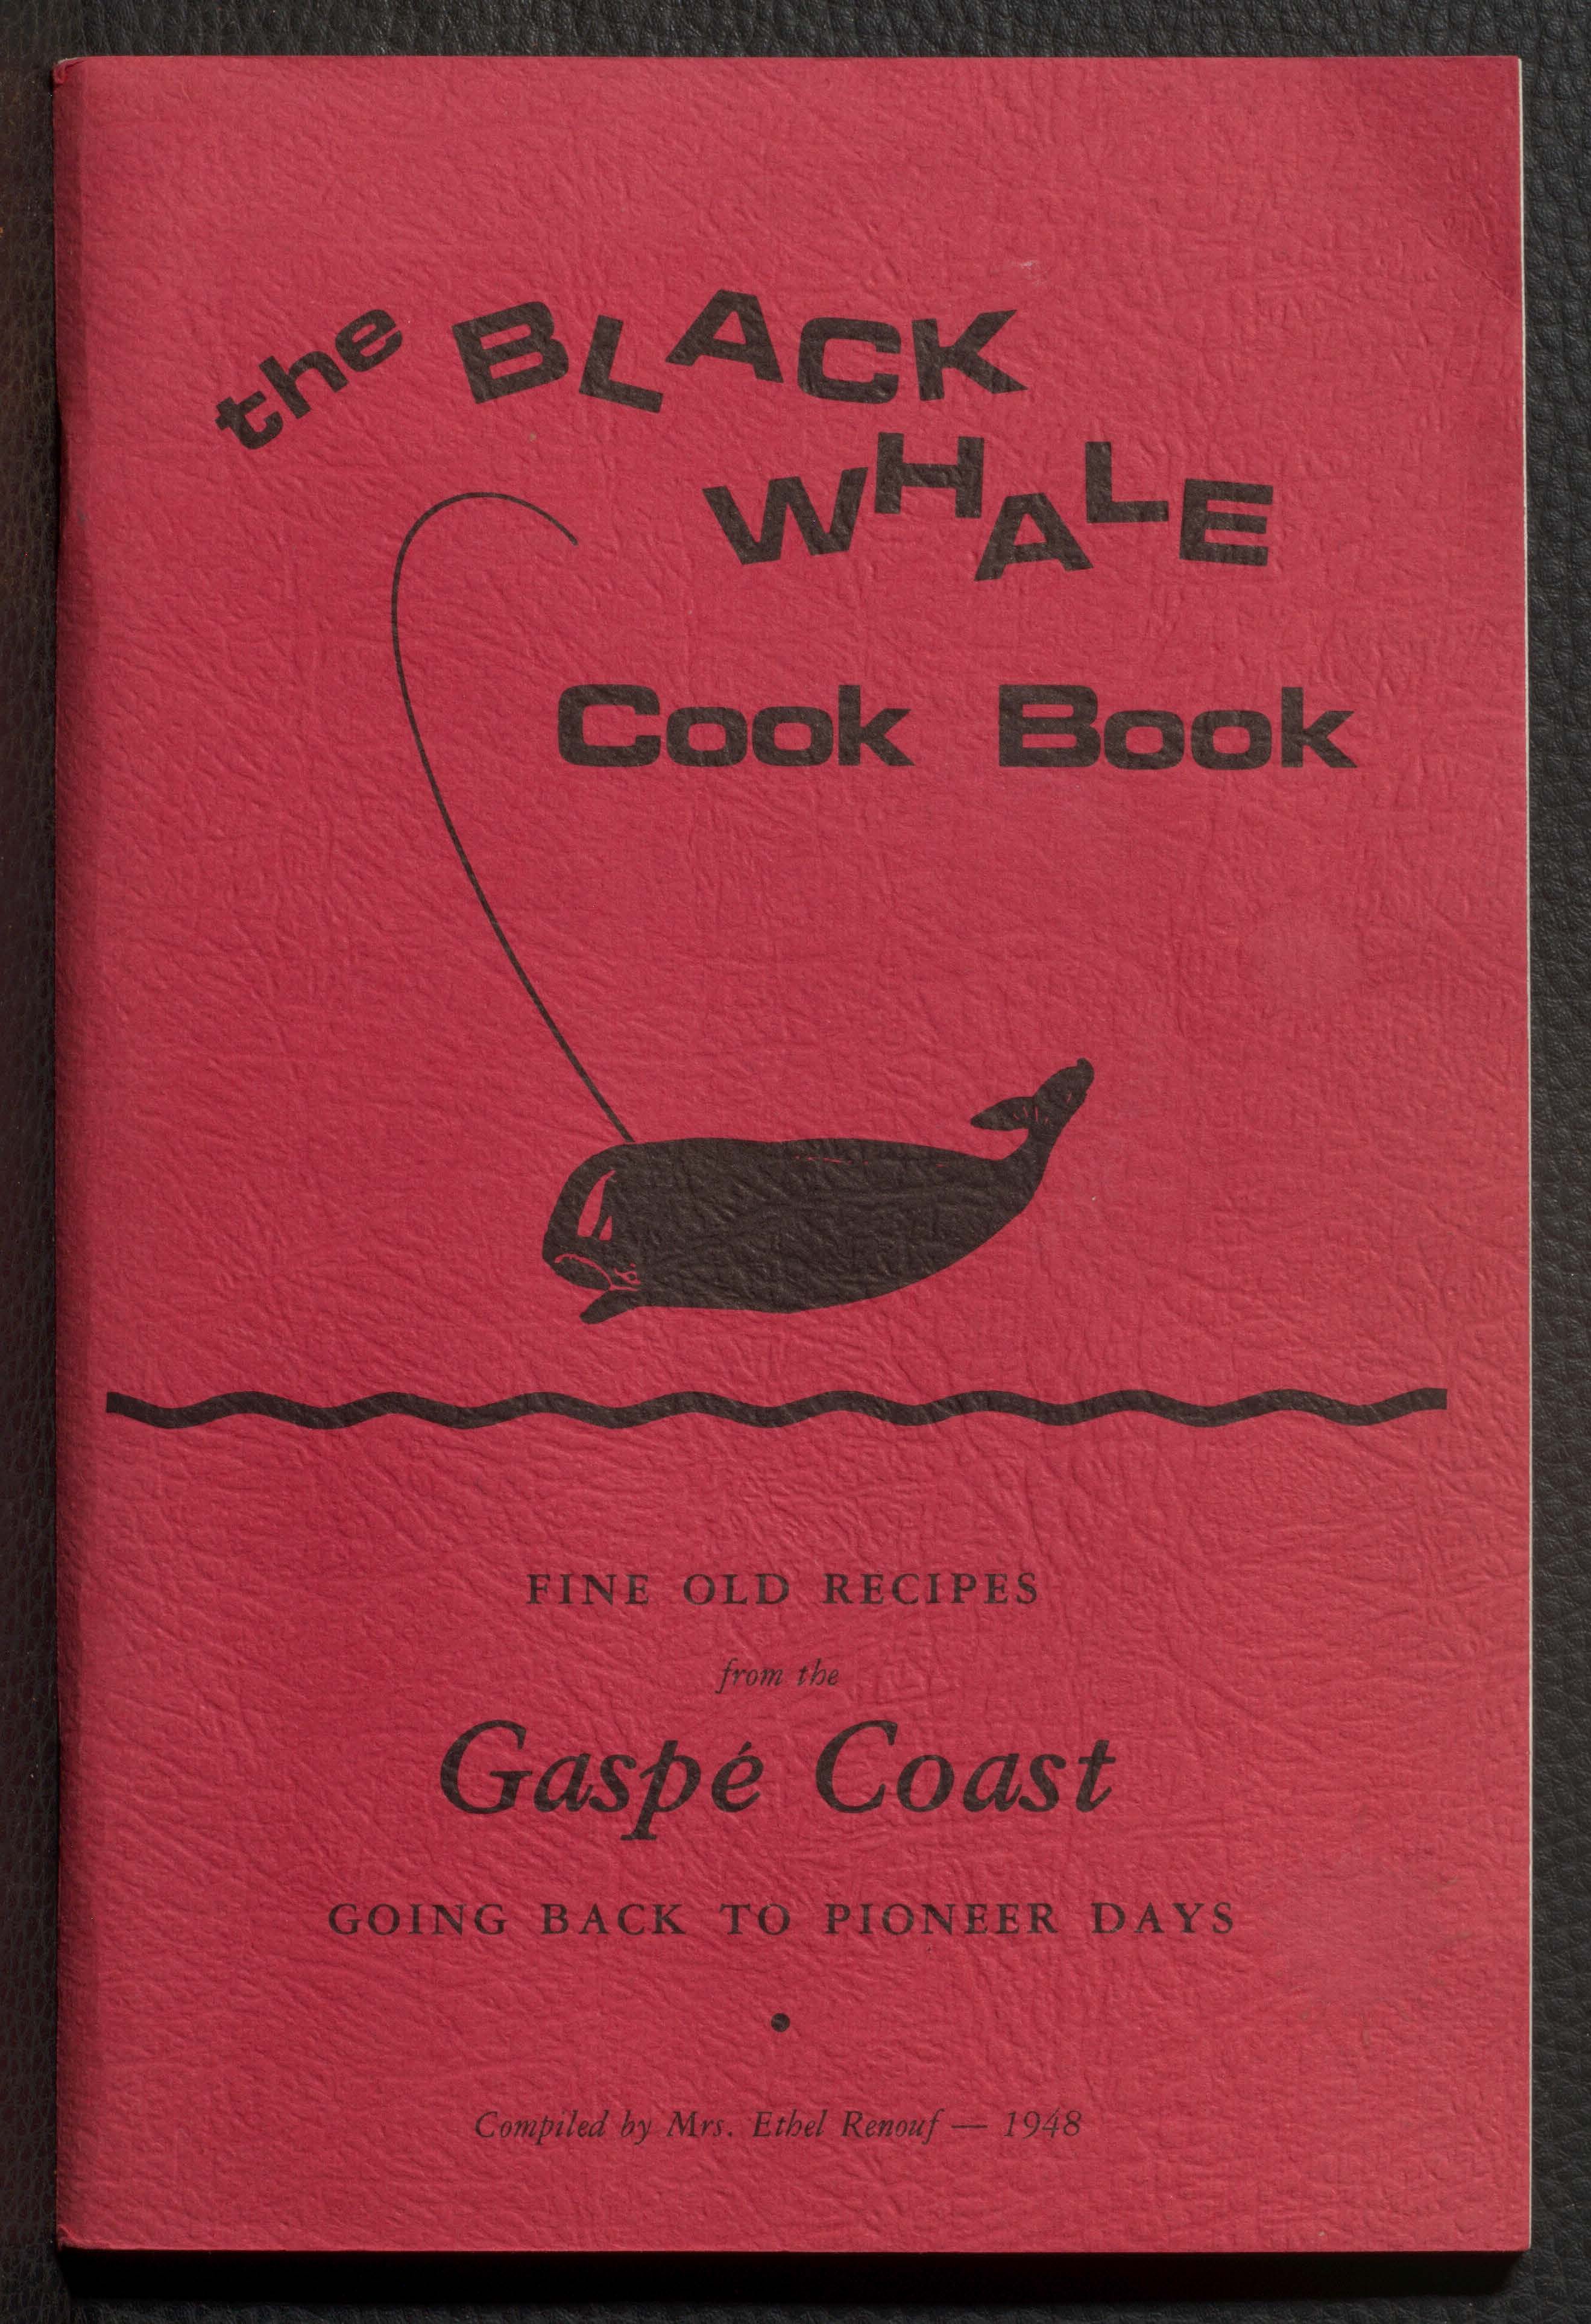 I am celebrating today! This cookbook has been my white whale